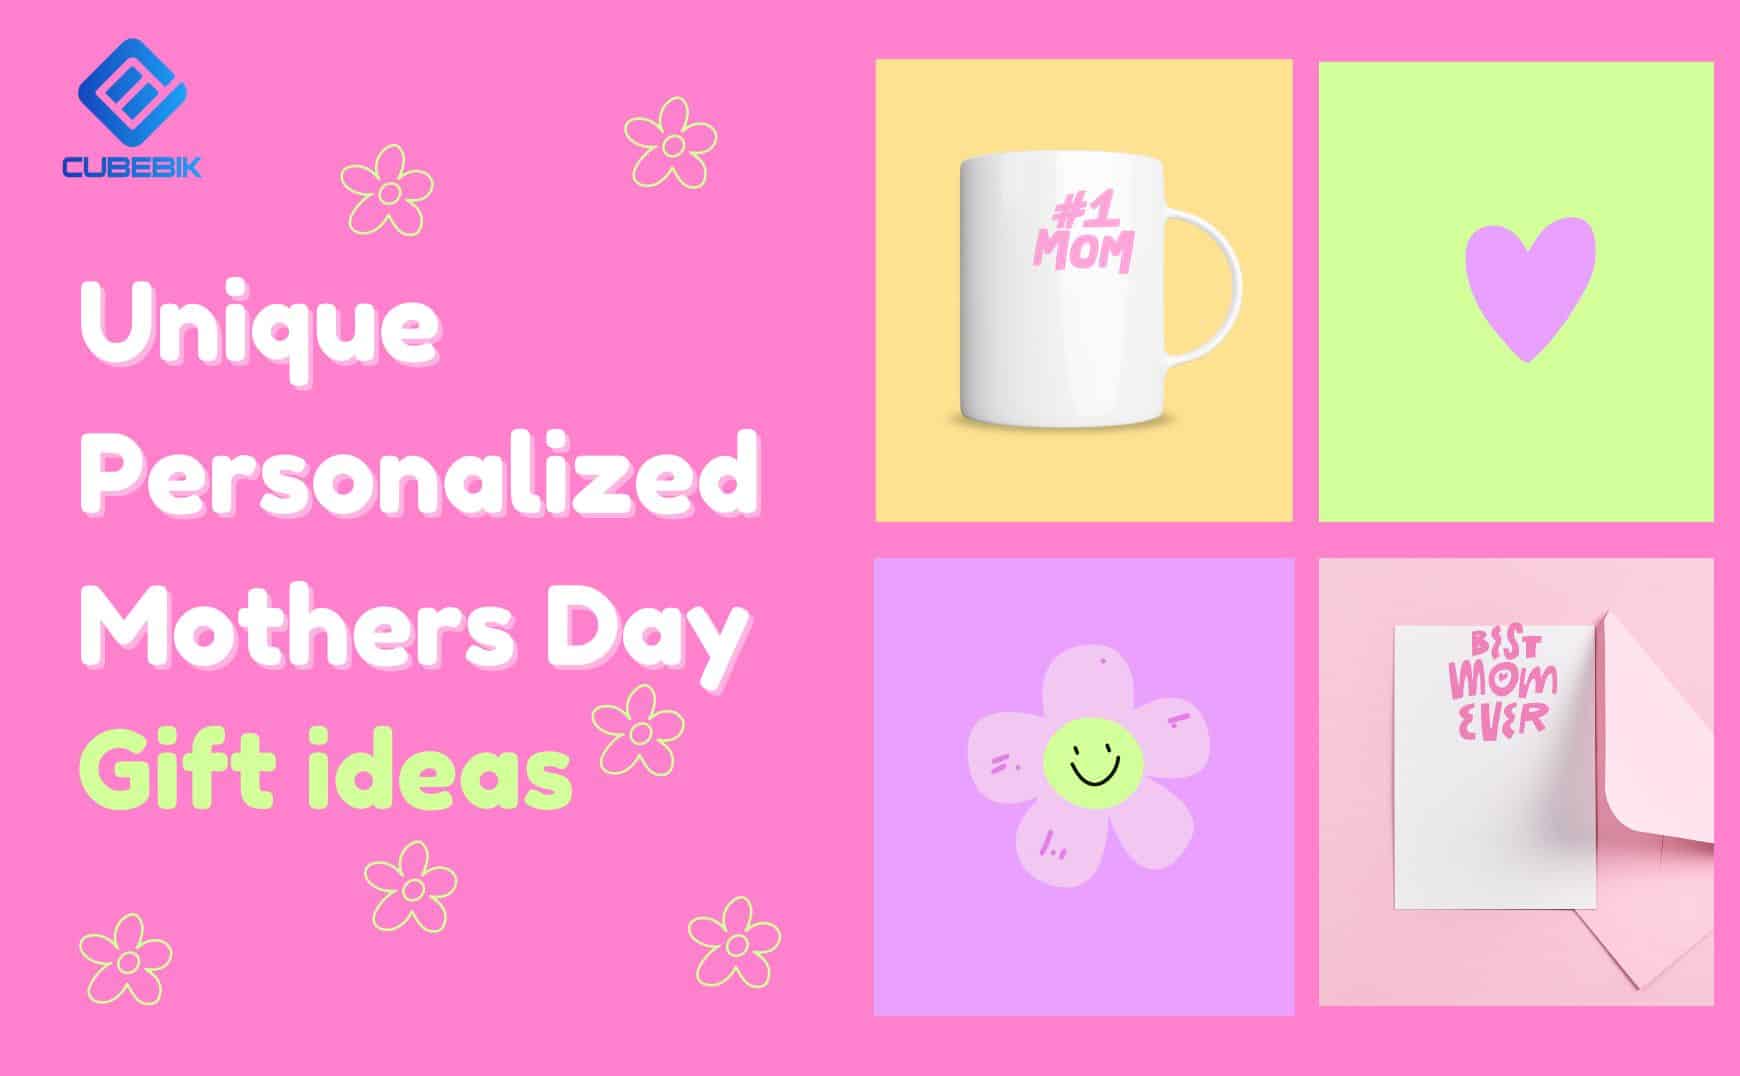 Unique Personalized Mothers Day Gifts